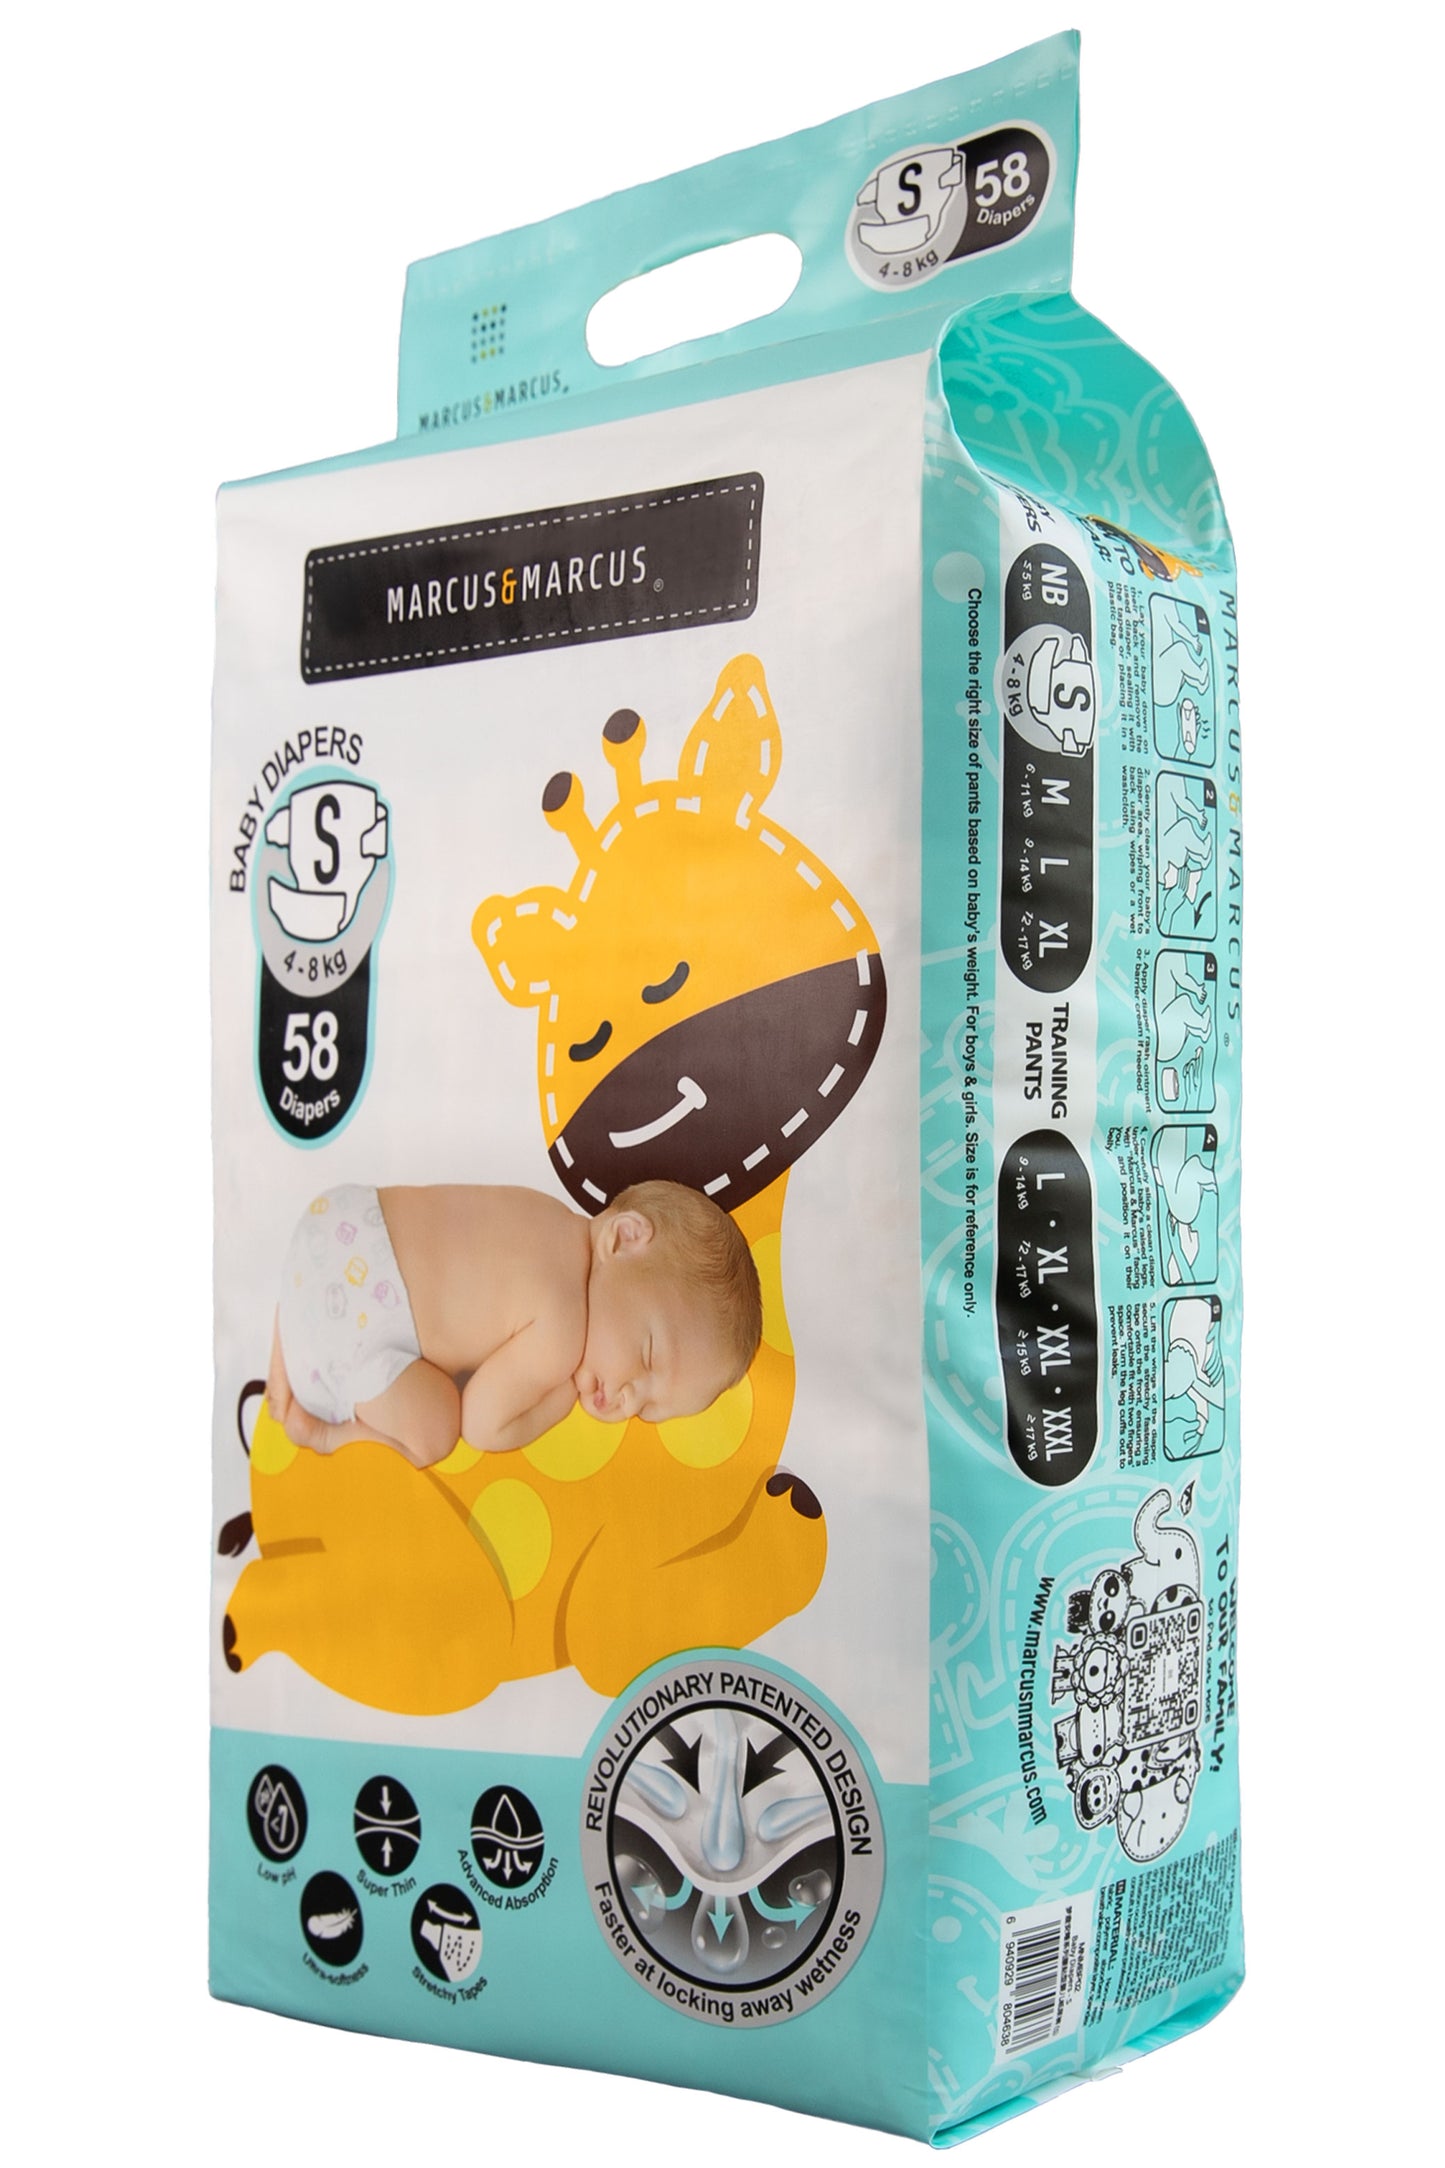 Marus & Marcus diaper, S size, super absorbency